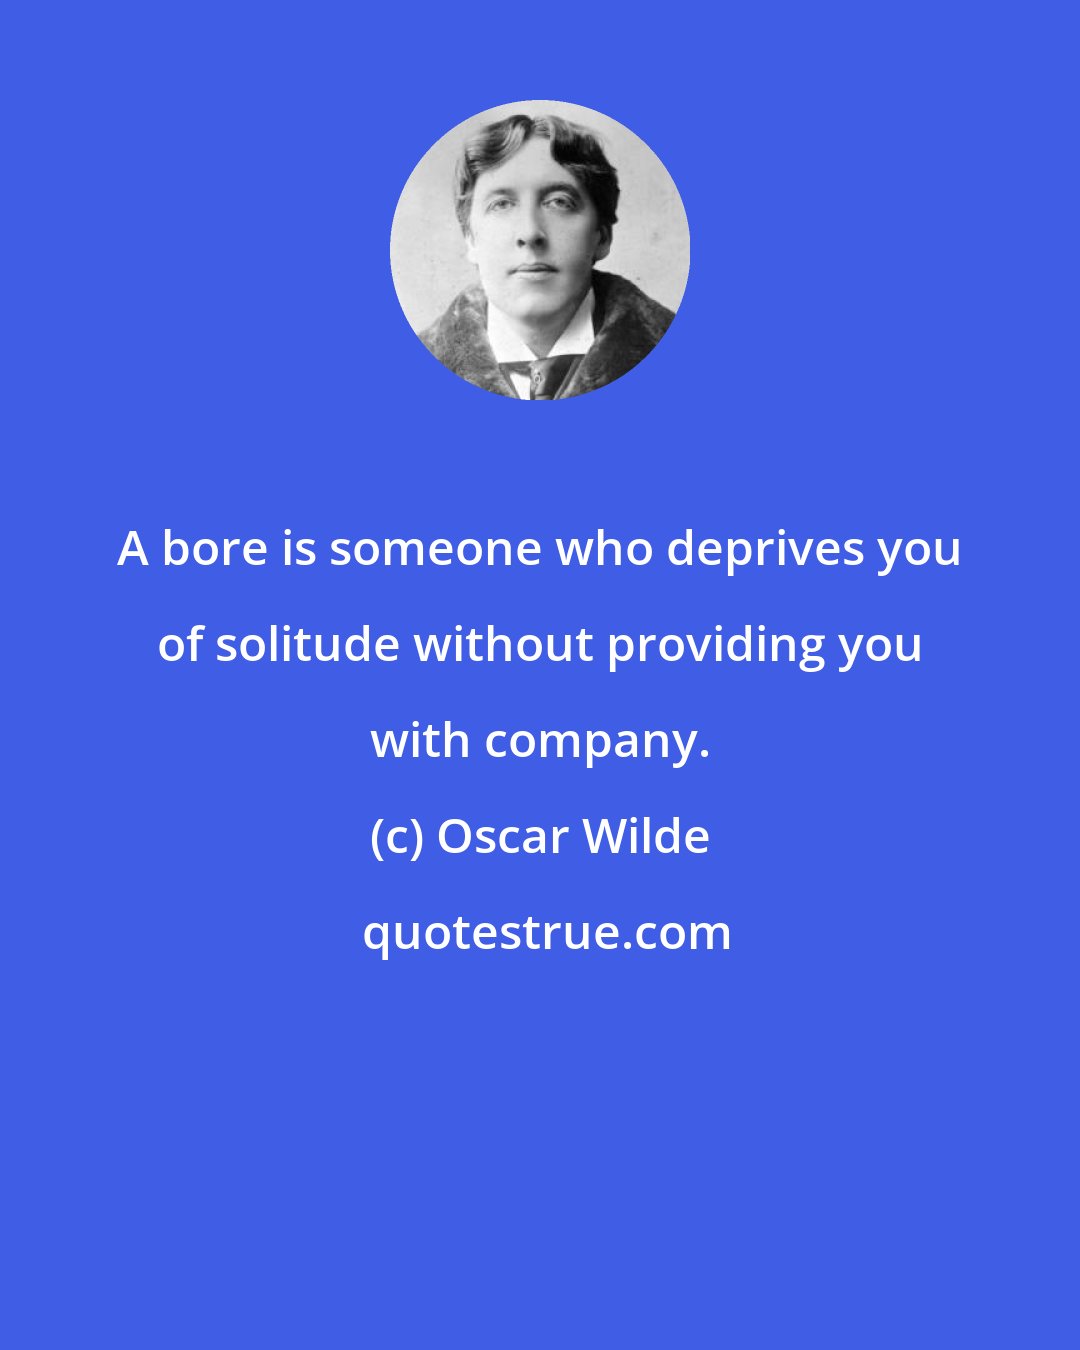 Oscar Wilde: A bore is someone who deprives you of solitude without providing you with company.